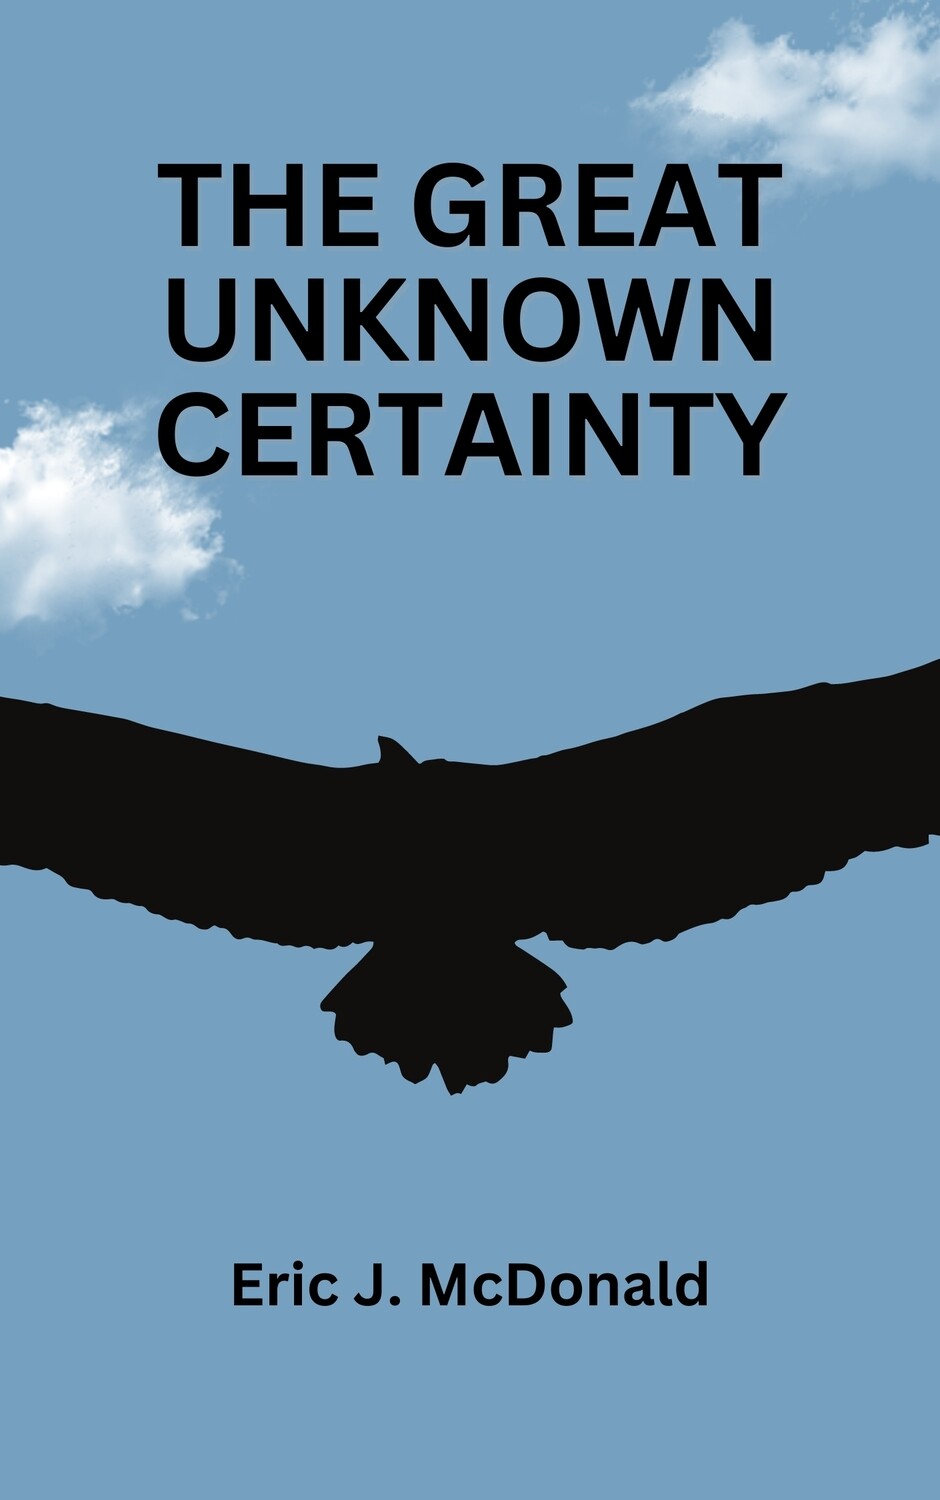 The Great Unknown Certainty